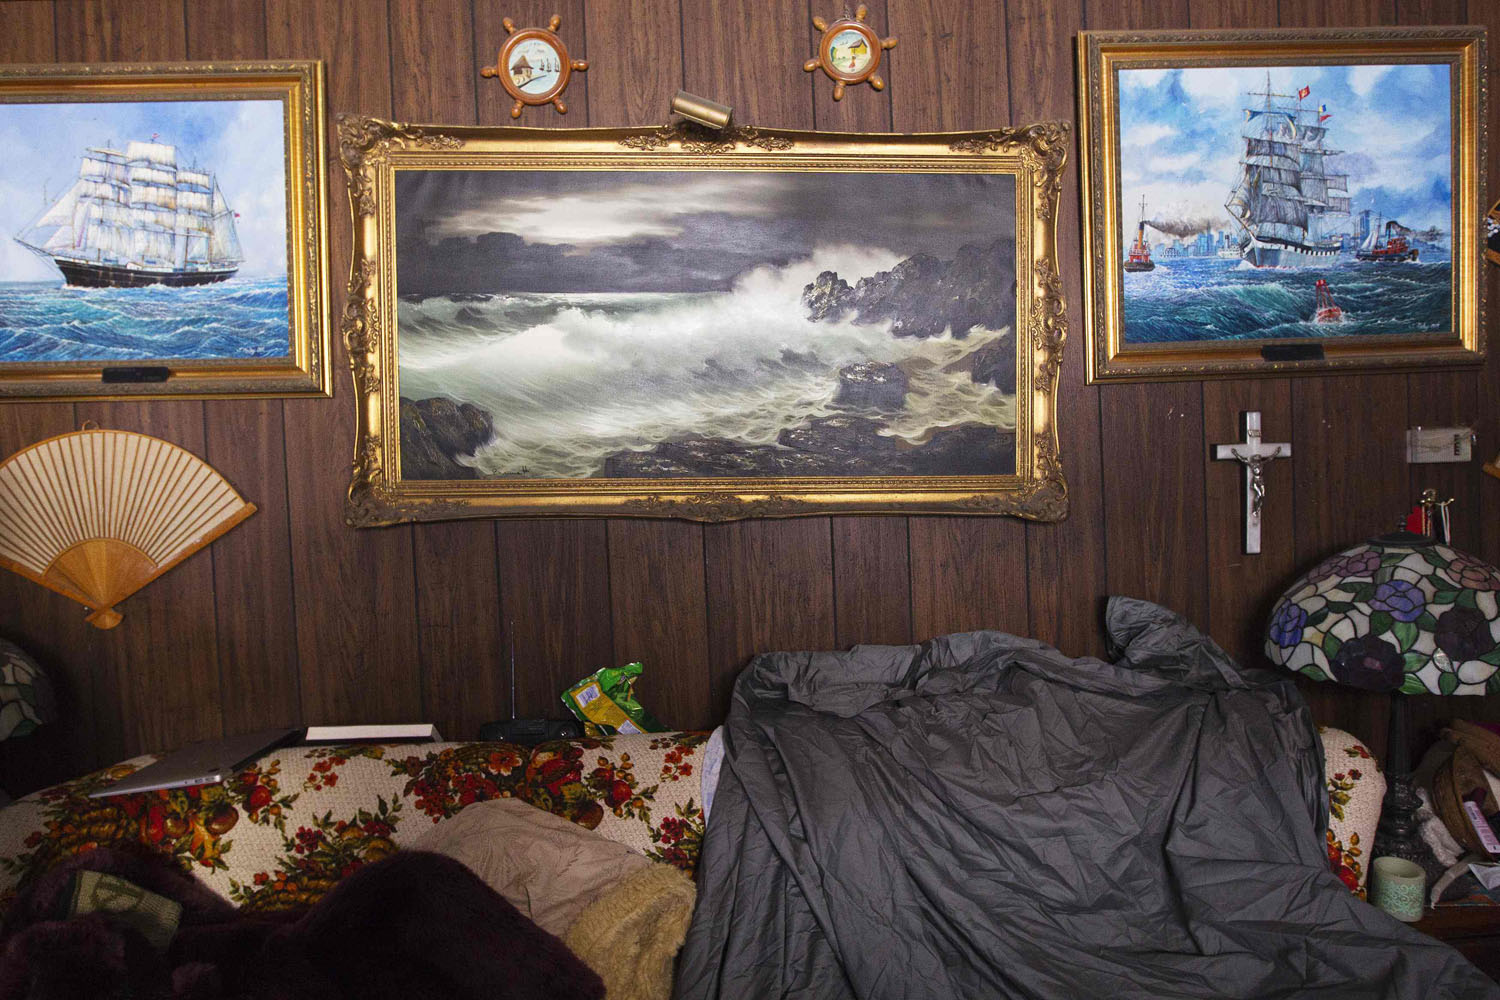 Image: Nov. 2, 2012. Paintings are seen inside a hurricane damaged home in Long Beach, N.Y. Four days after superstorm Sandy smashed into the U.S. Northeast, rescuers were still discovering the extent of the death and devastation in New York and the New Jersey shore, and anger mounted over gasoline shortages, power outages and waits for relief supplies.